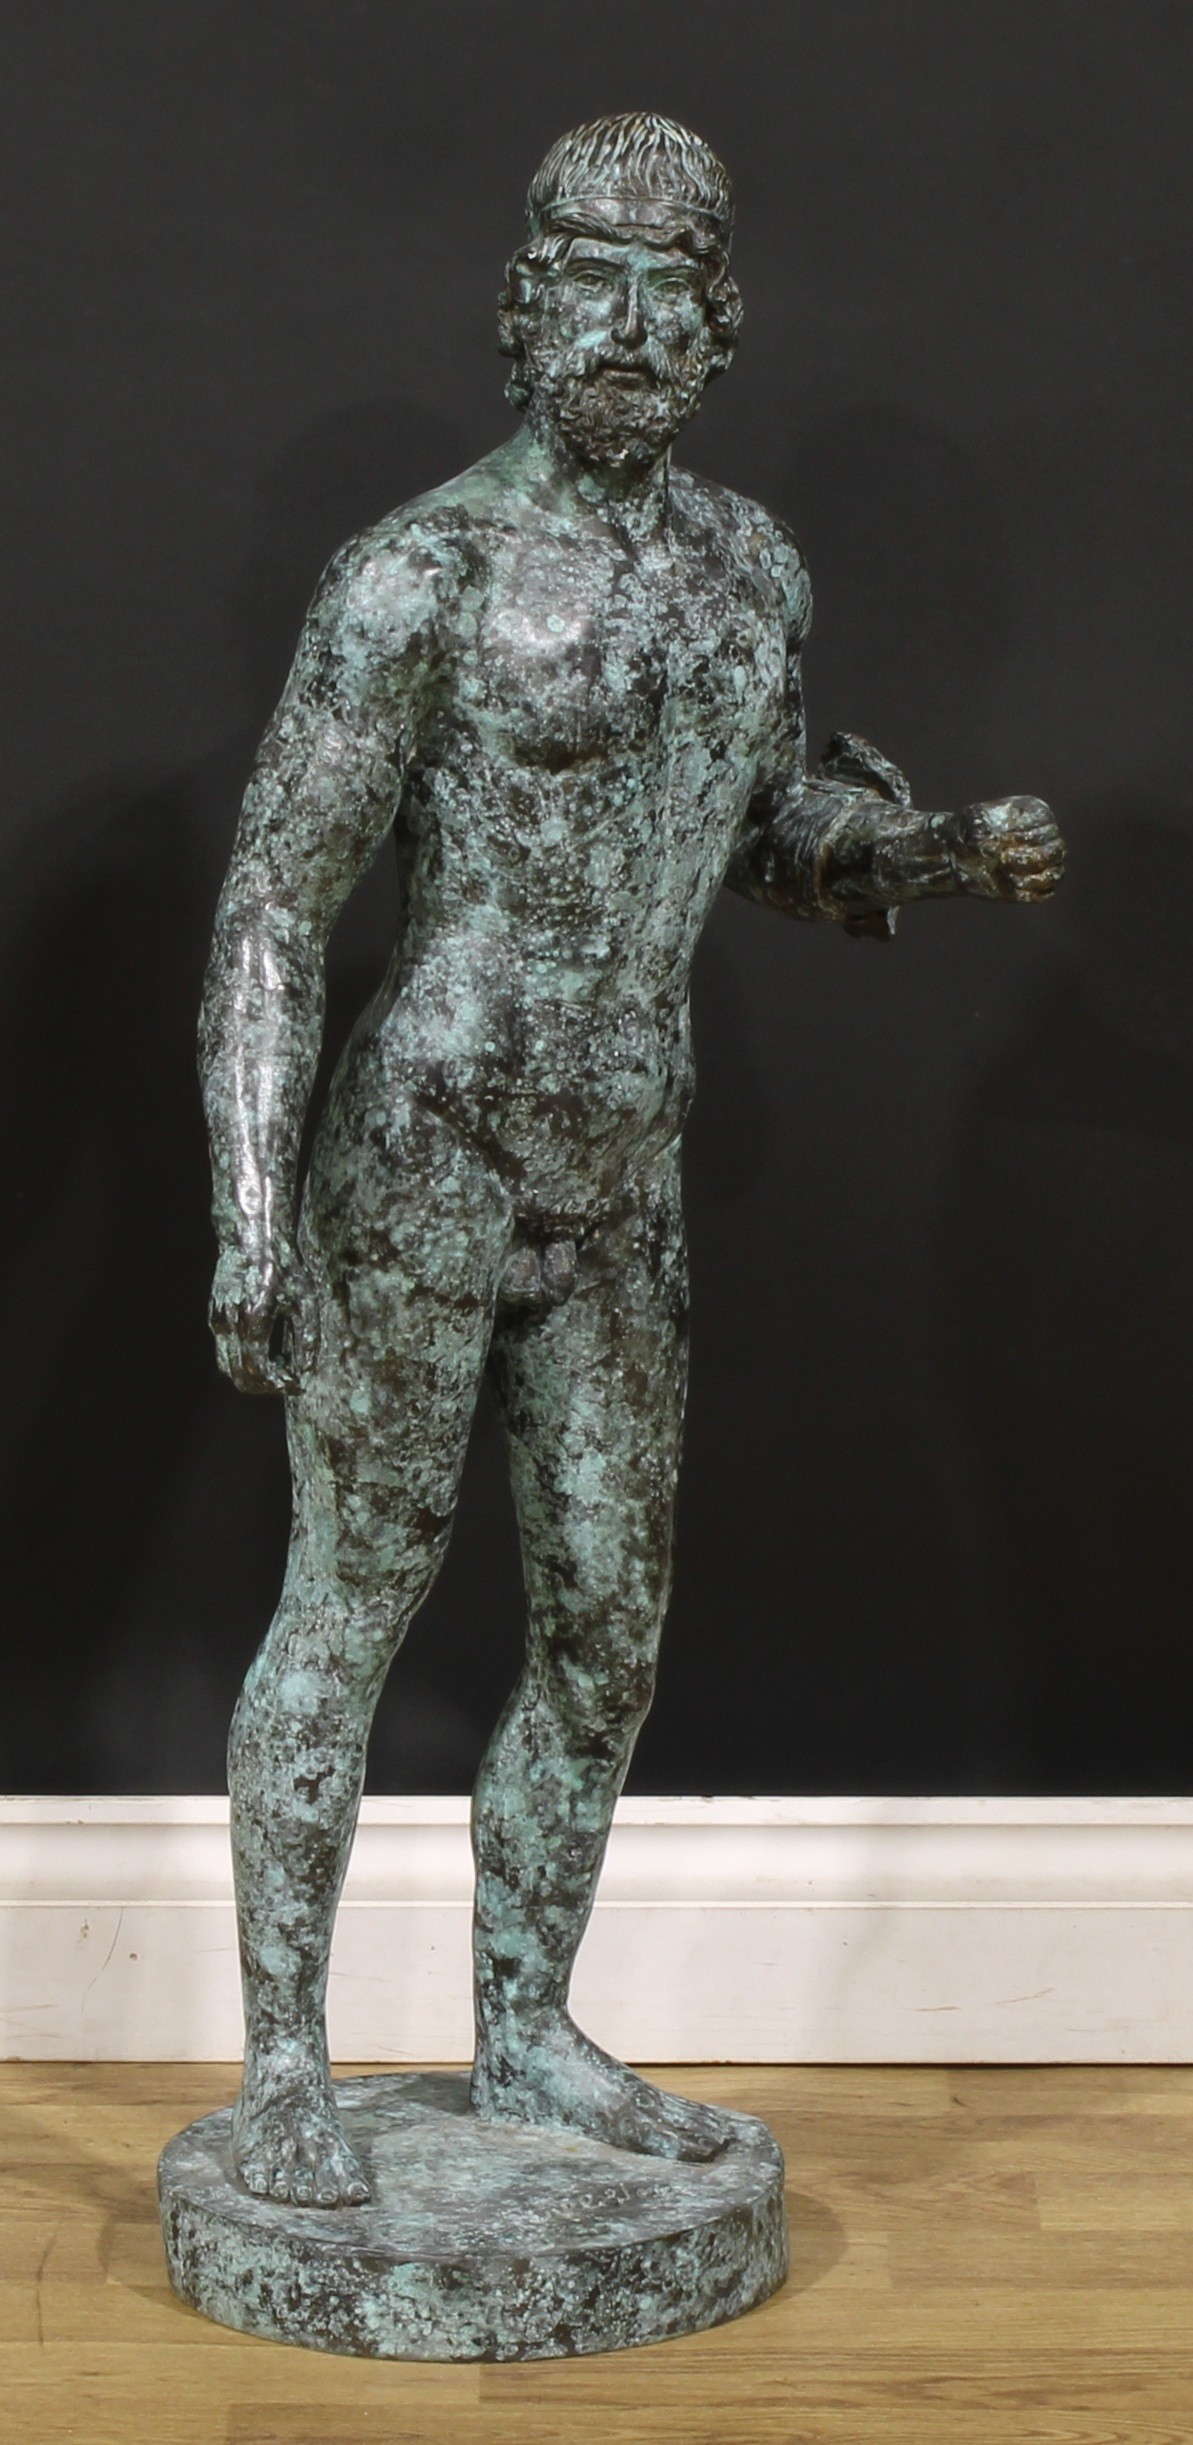 After the antique, a large verdigris patinated bronze figure, Warrior of Riace, signed J Tallsten,